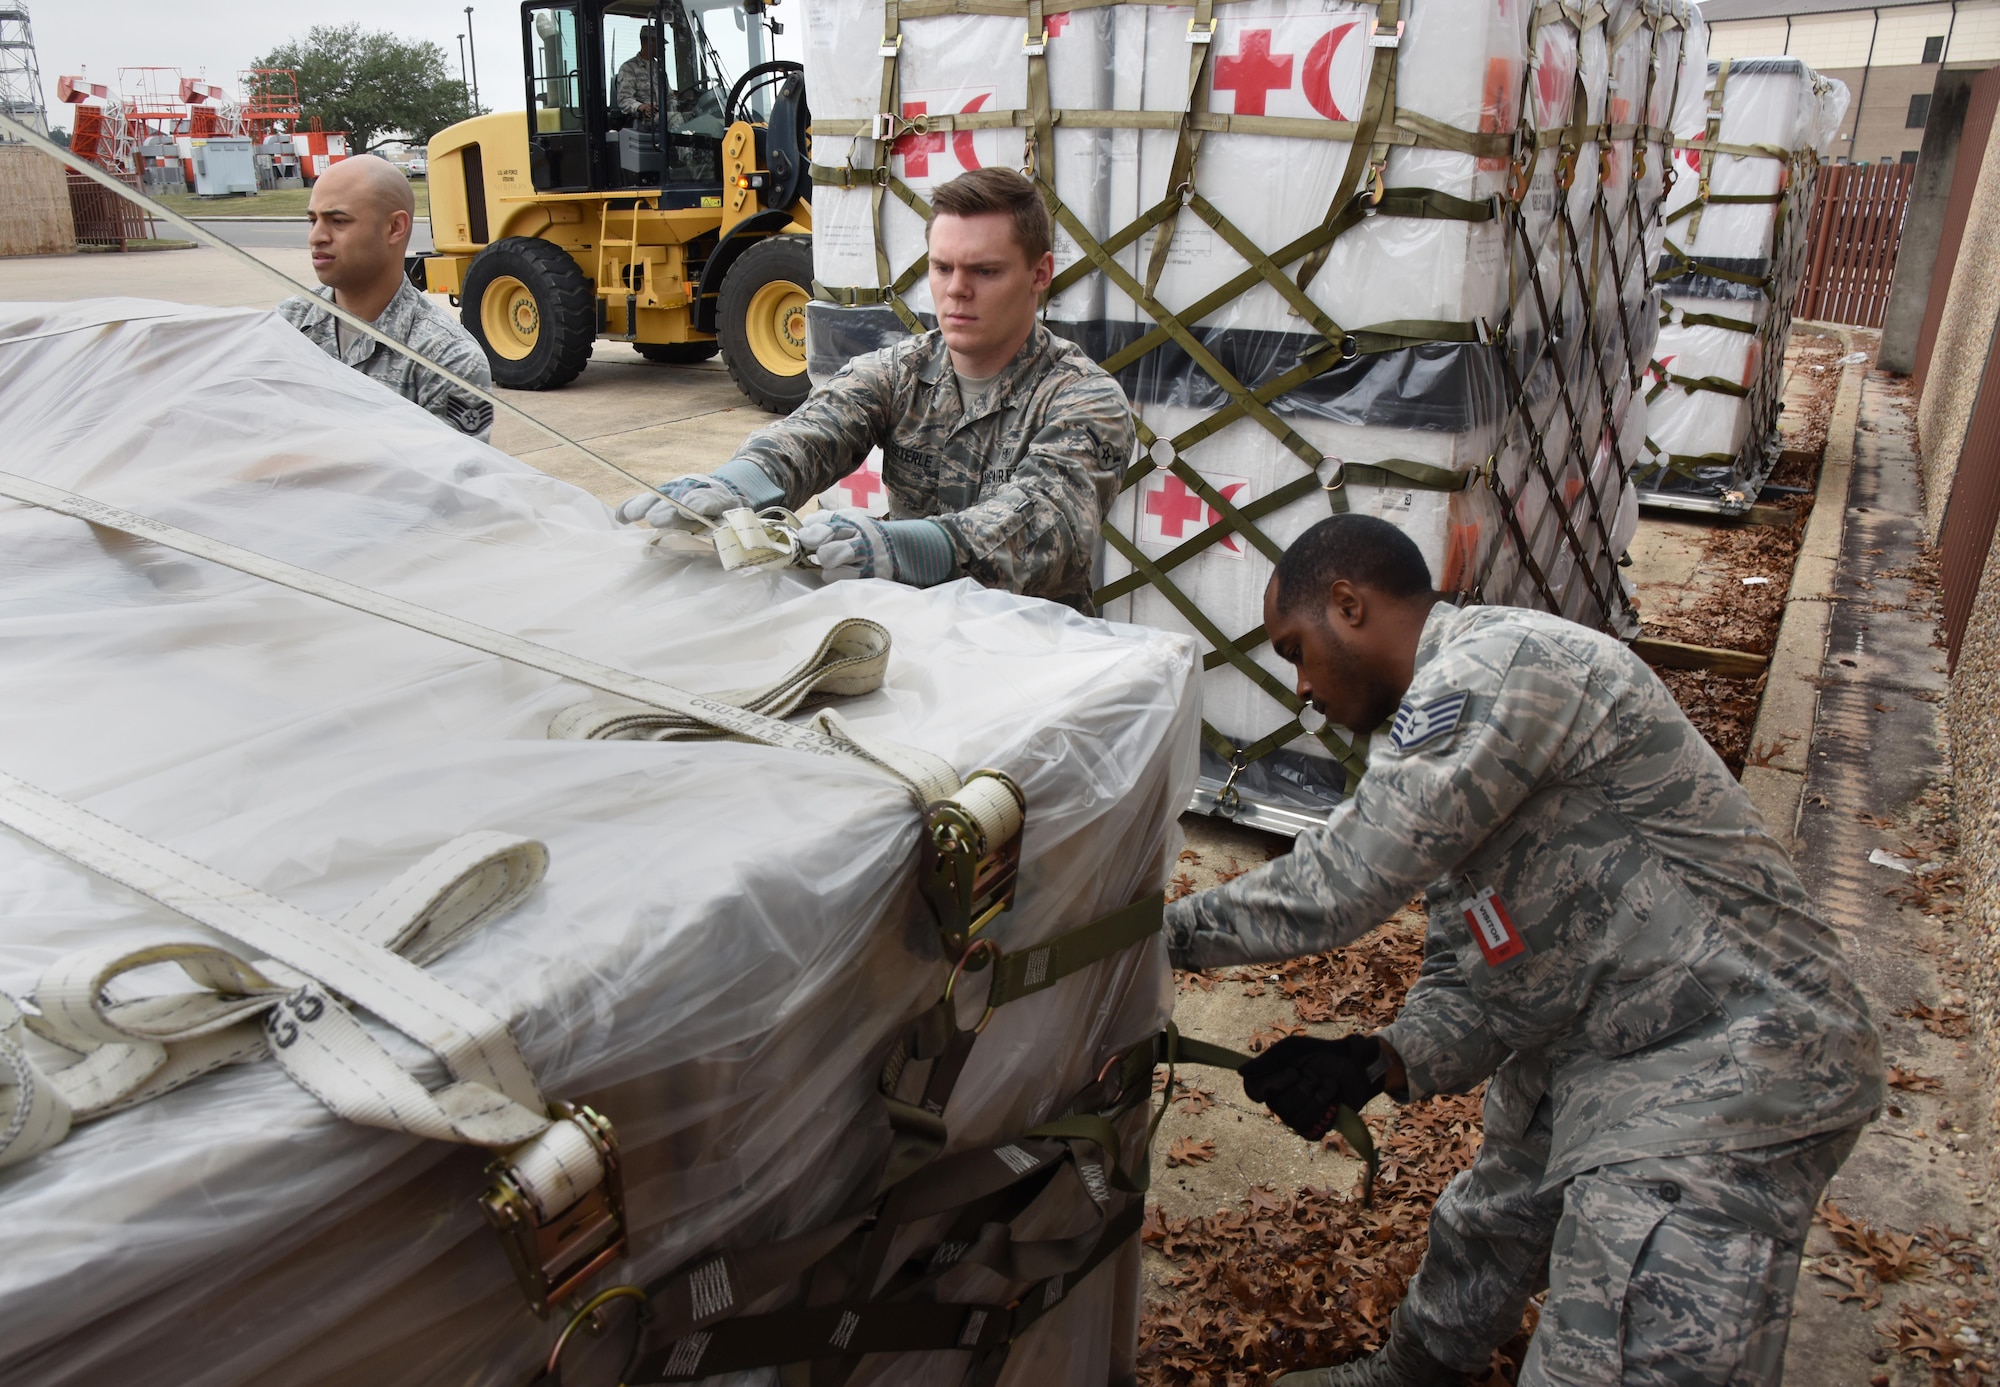 Medical logistics technicians from the 81st Medical Support Squadron logistics technicians tighten cargo straps at the supply warehouse loading docks during a deployment exercise Dec. 7, 2016, on Keesler Air Force Base, Miss. The exercise scenario tested the mission readiness of Team Keesler for simultaneous world-wide deployments. (U.S. Air Force photo by Kemberly Groue)